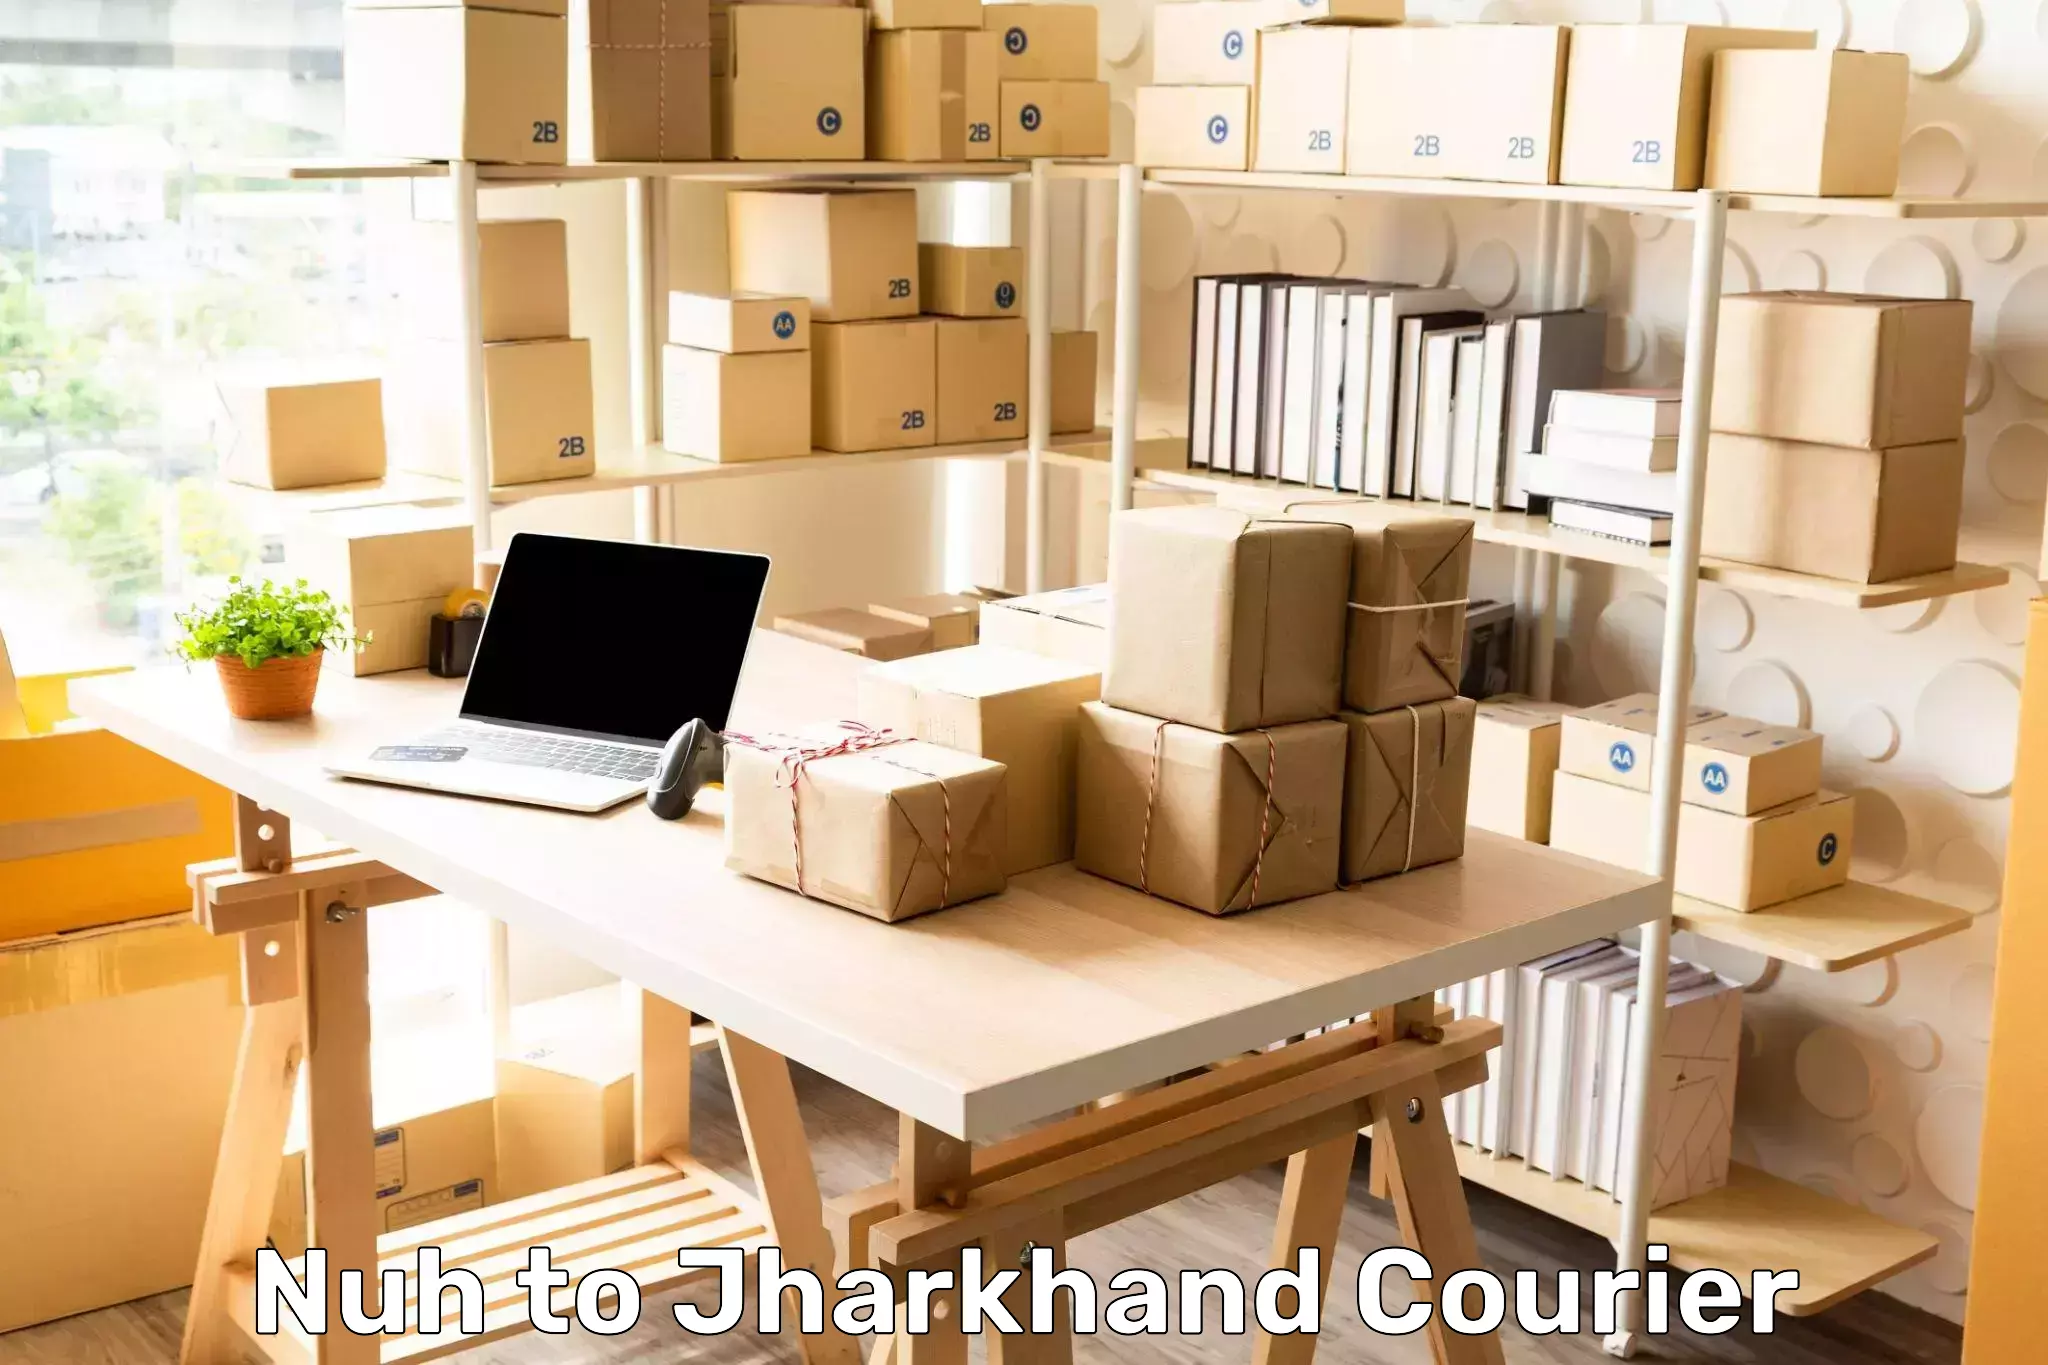 Seamless shipping experience Nuh to Jharkhand